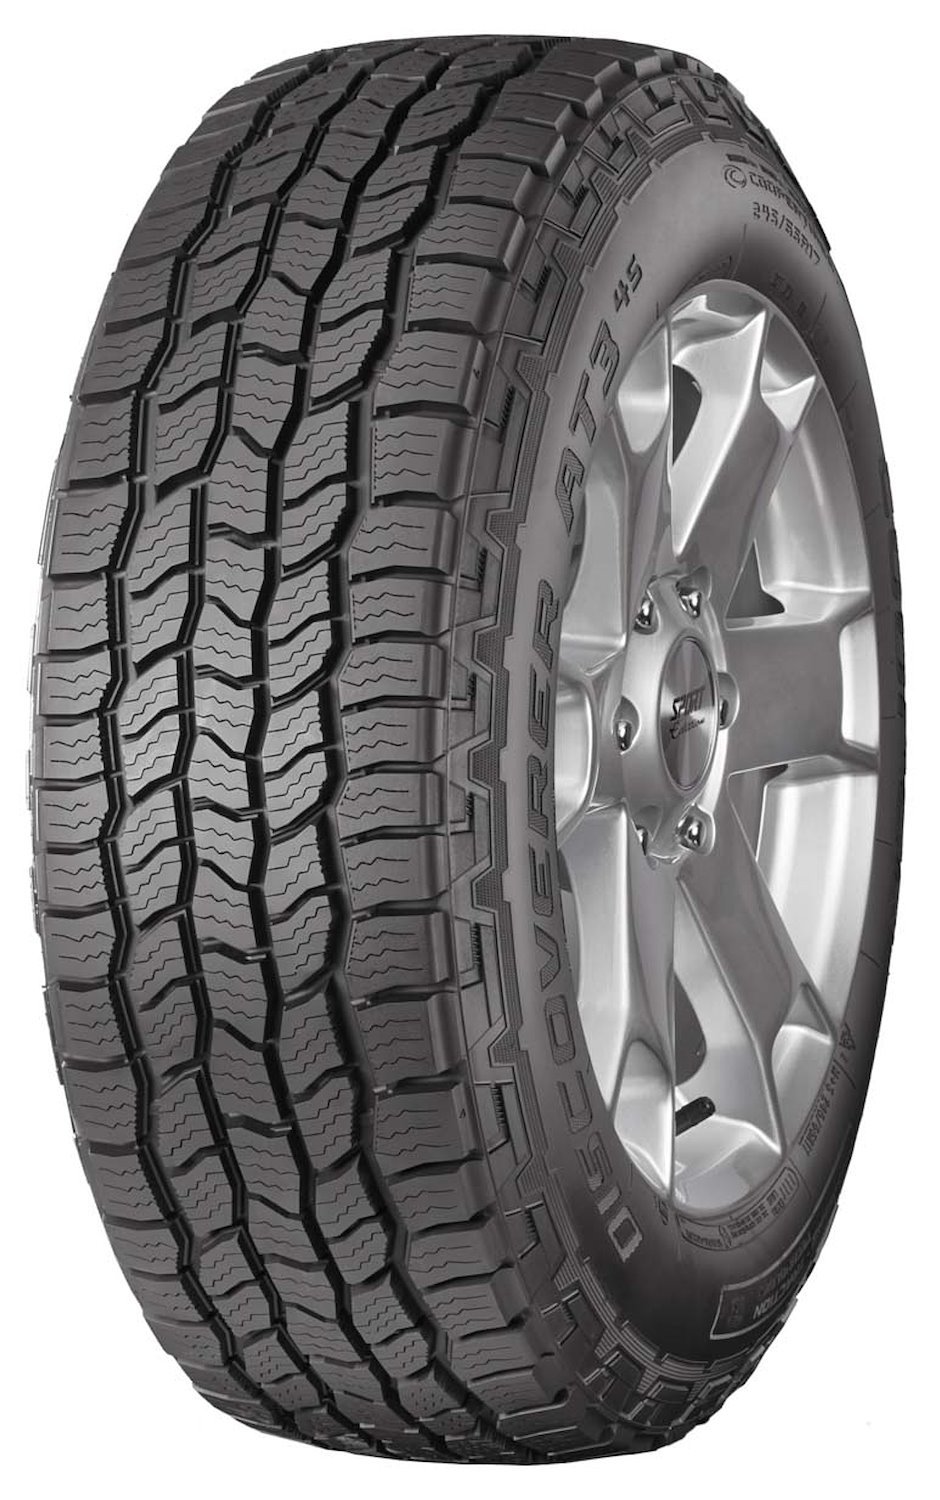 Discoverer AT3 4S All-Terrain Tire, 255/70R18